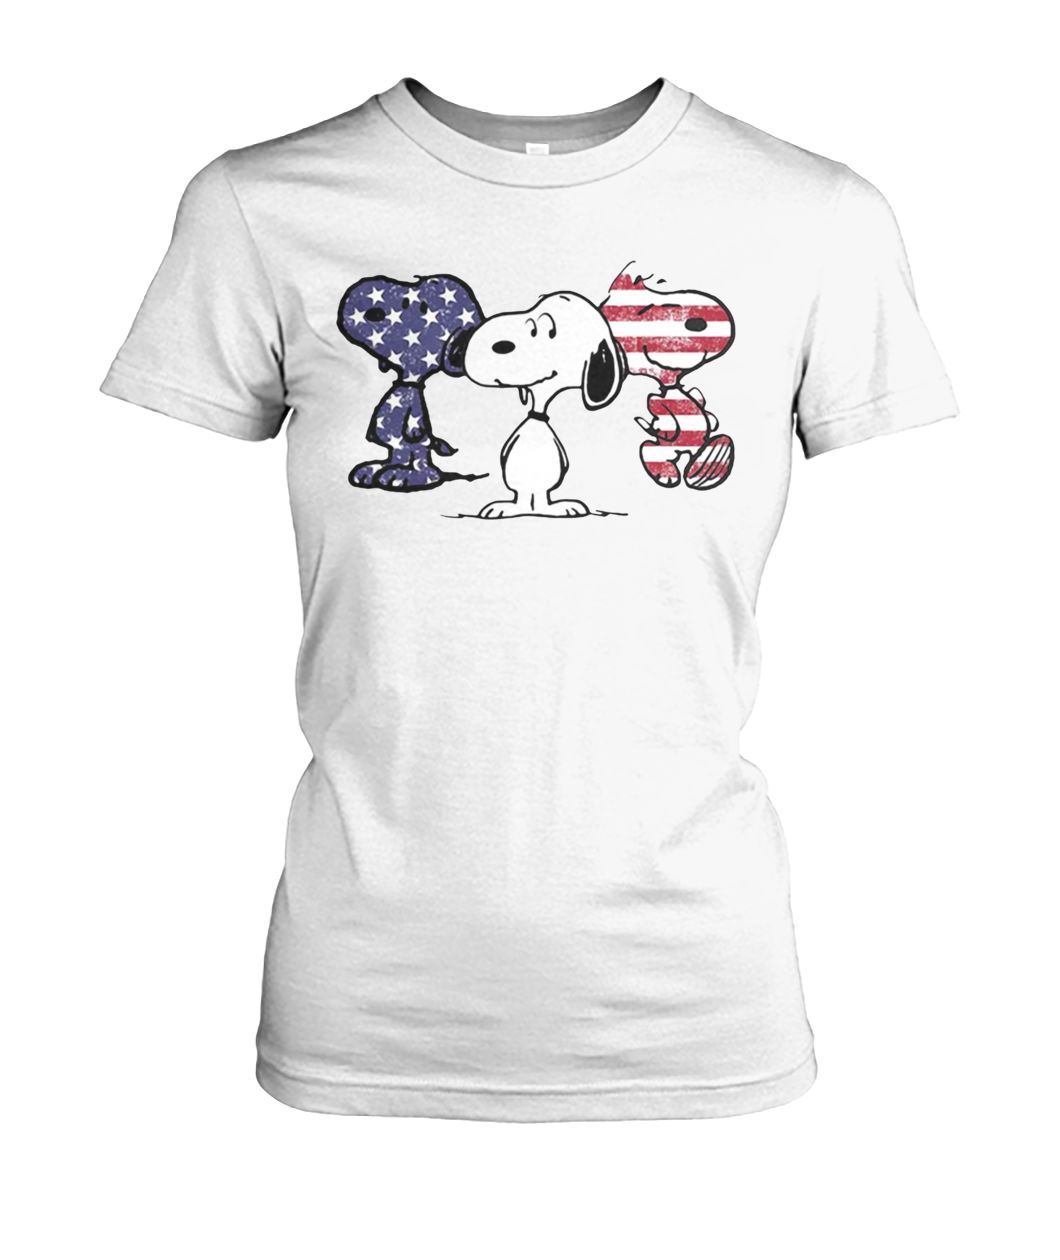 Snoopy america flag 4th of july women's crew tee